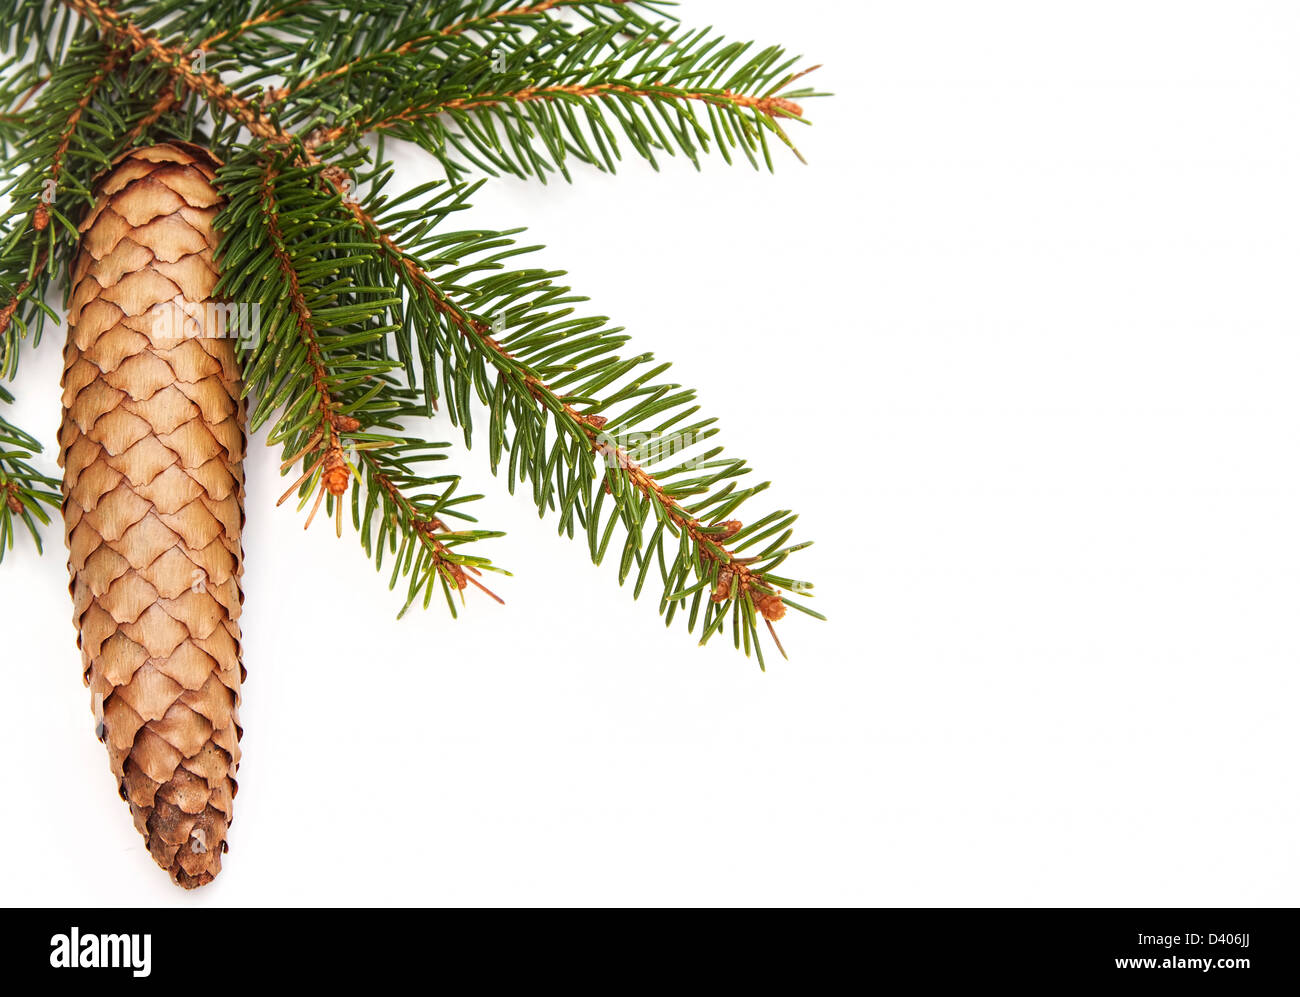 Pine cone and green christmas tree on a white background Stock Photo